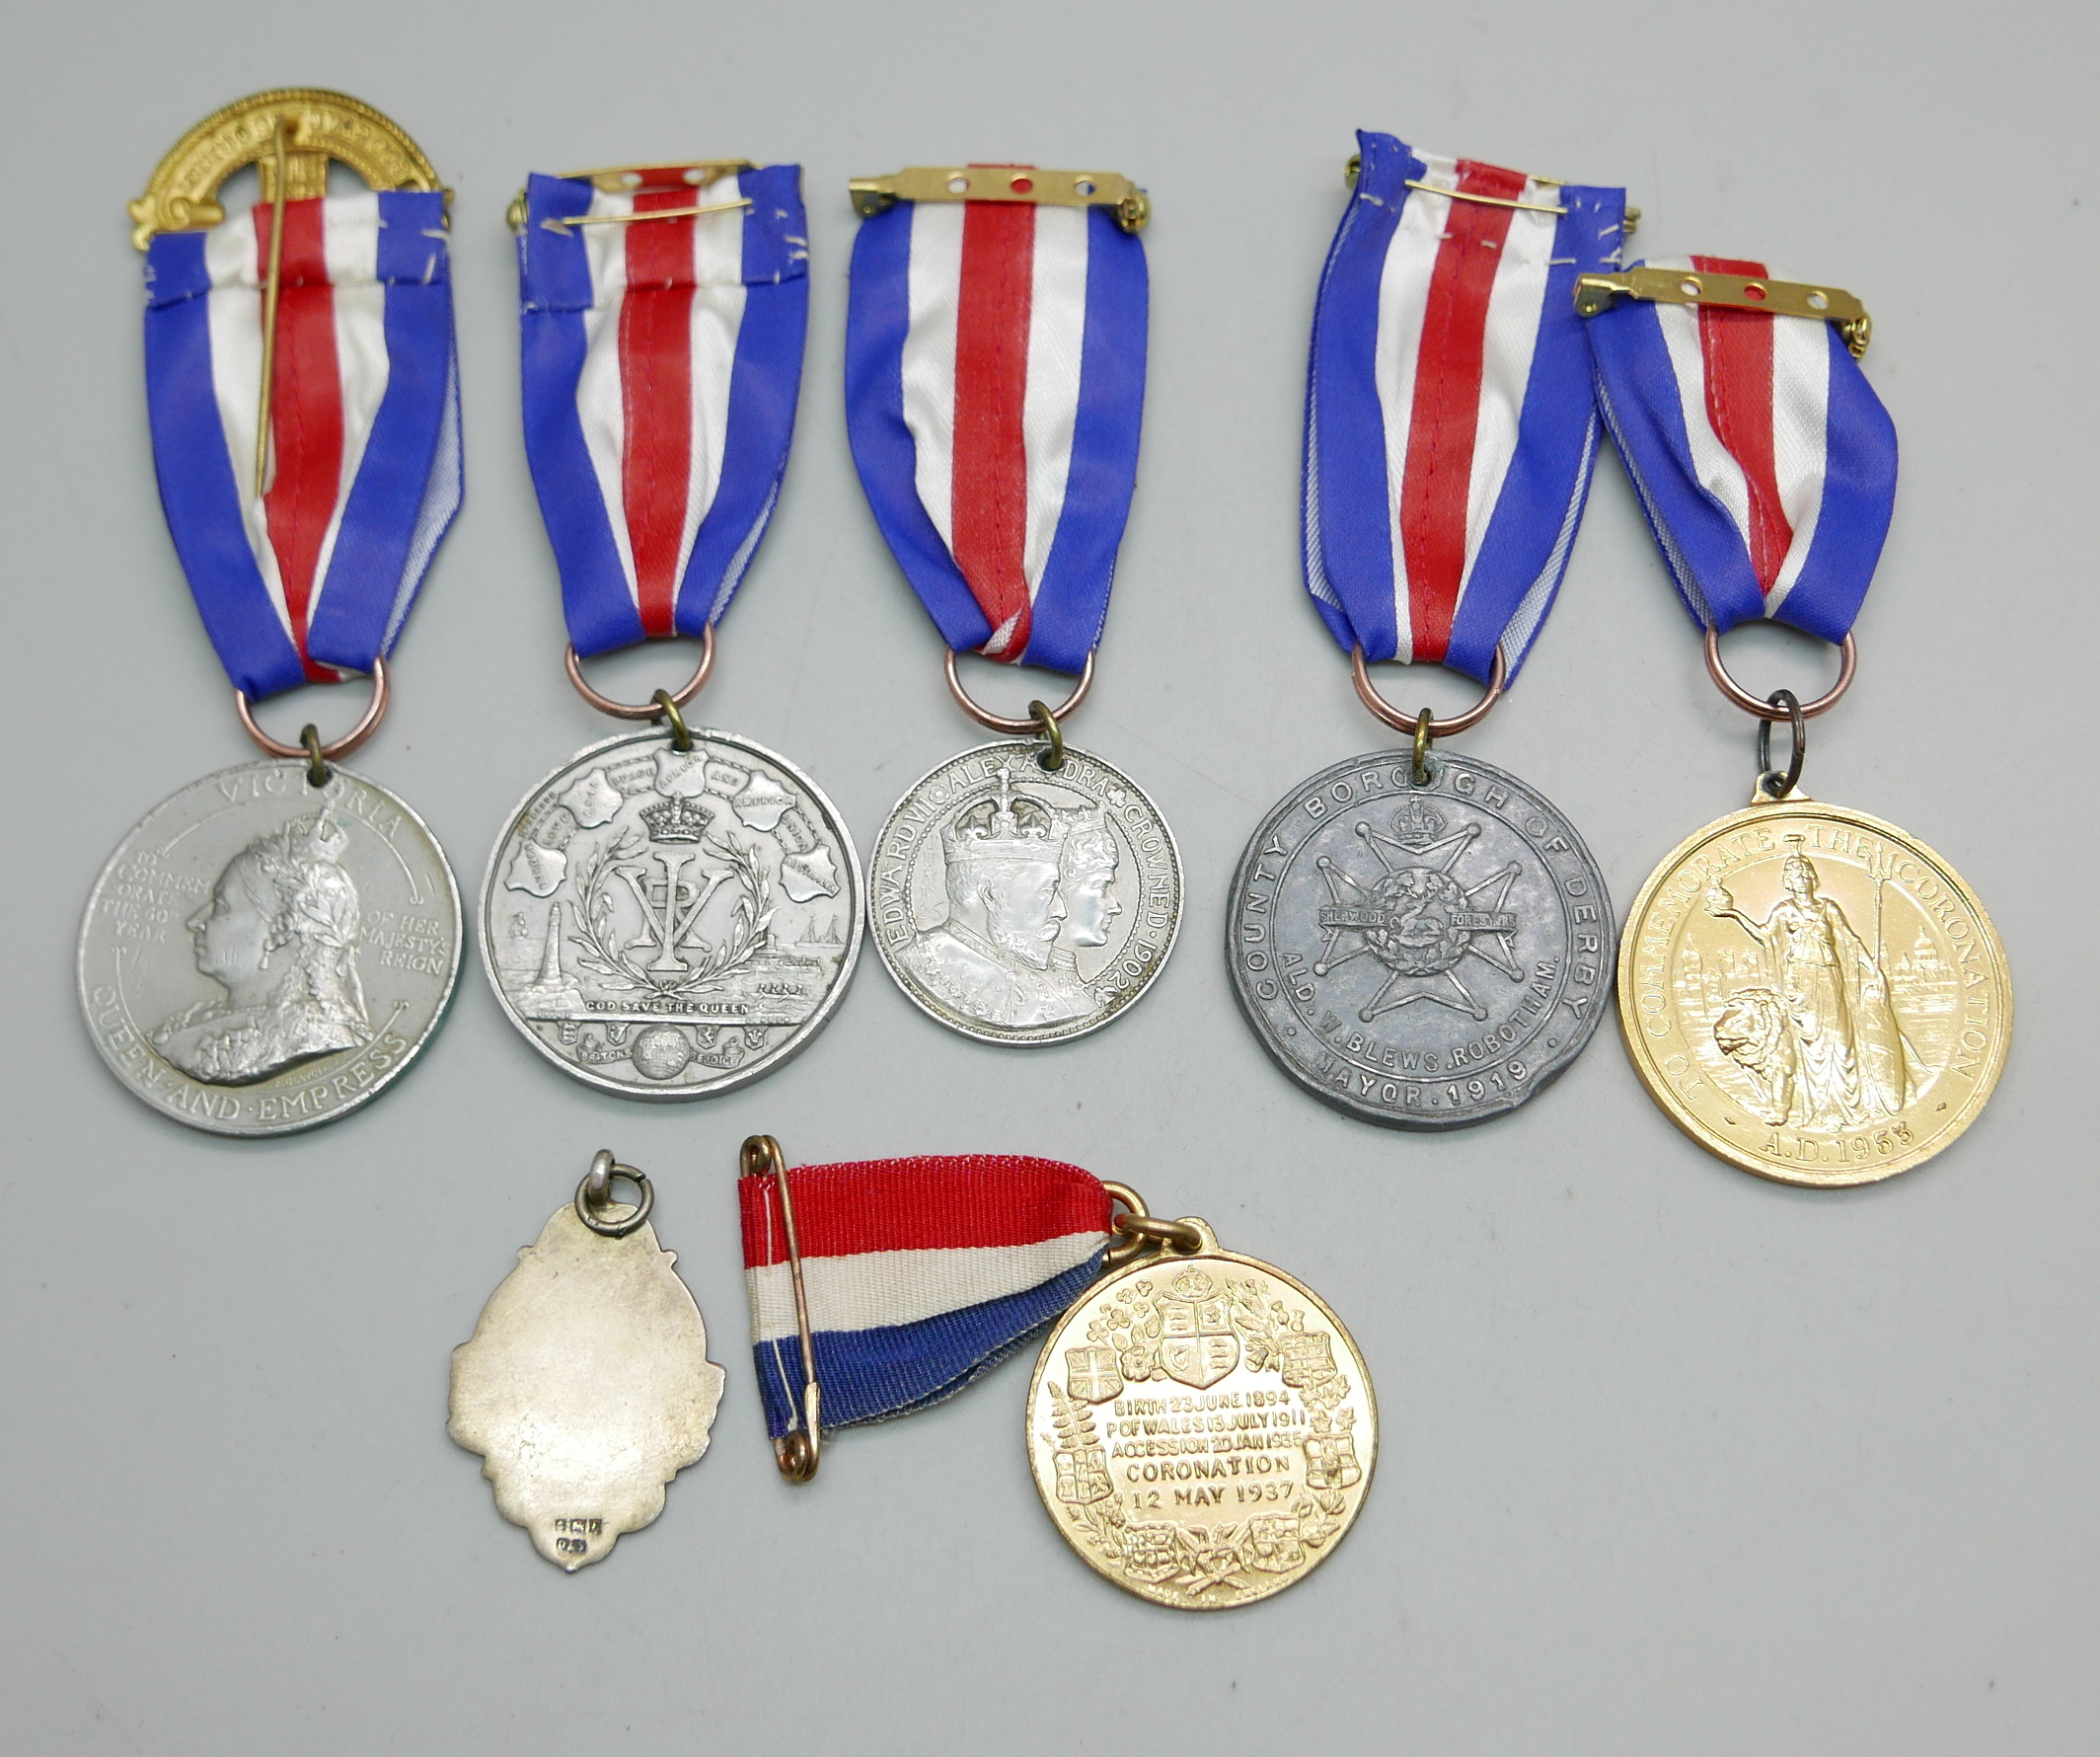 Six early 20th Century commemorative medallions and a silver fob medal - Image 4 of 4